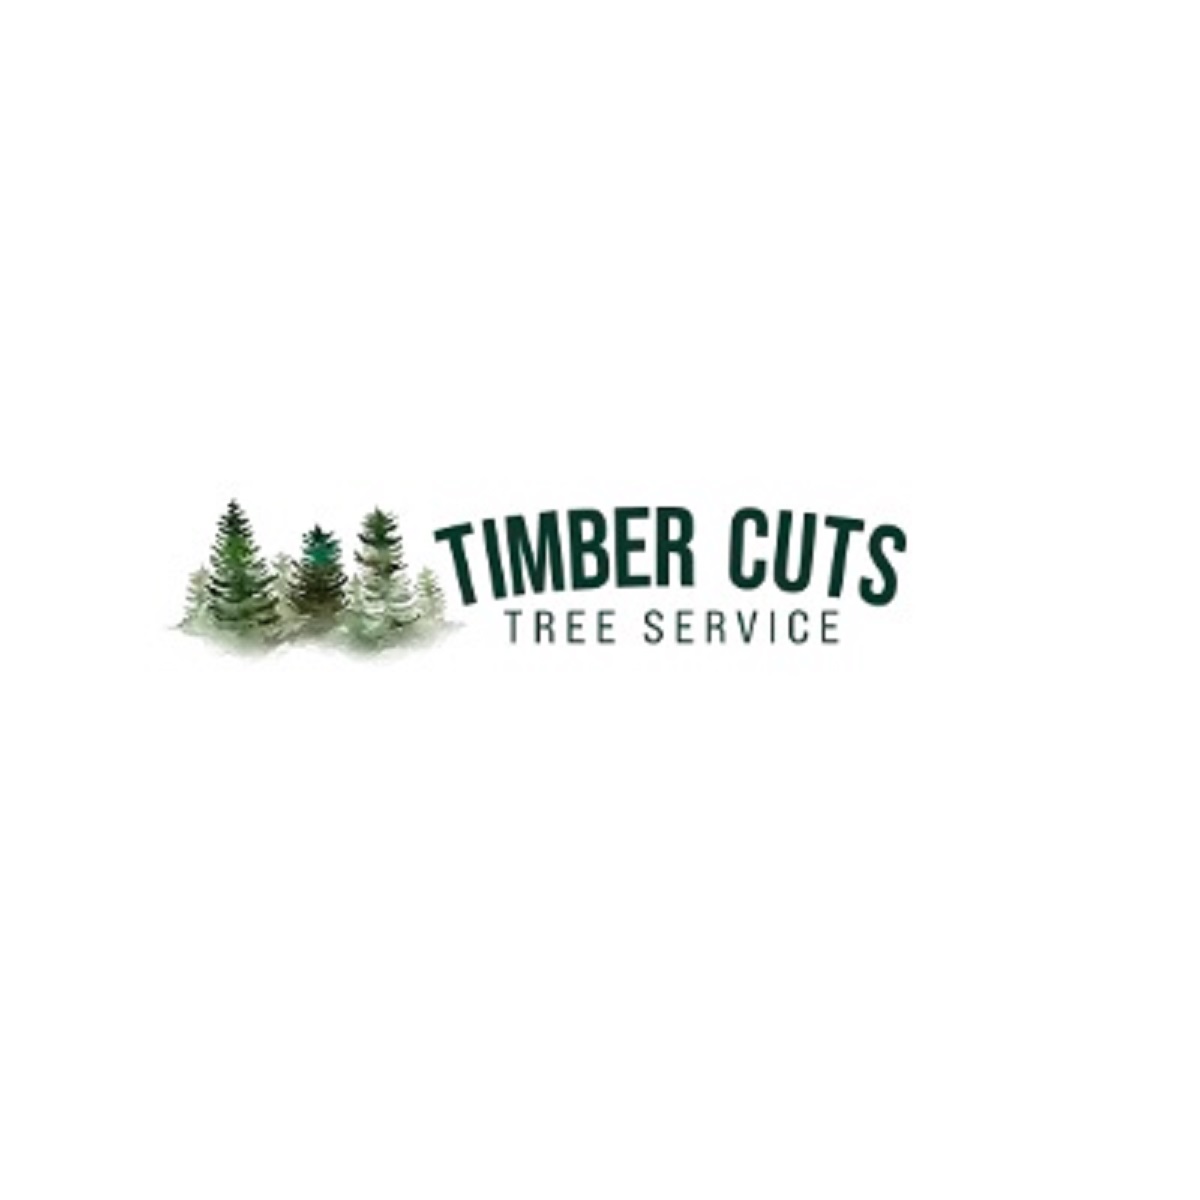 Timber Cuts Tree Service Cover Image